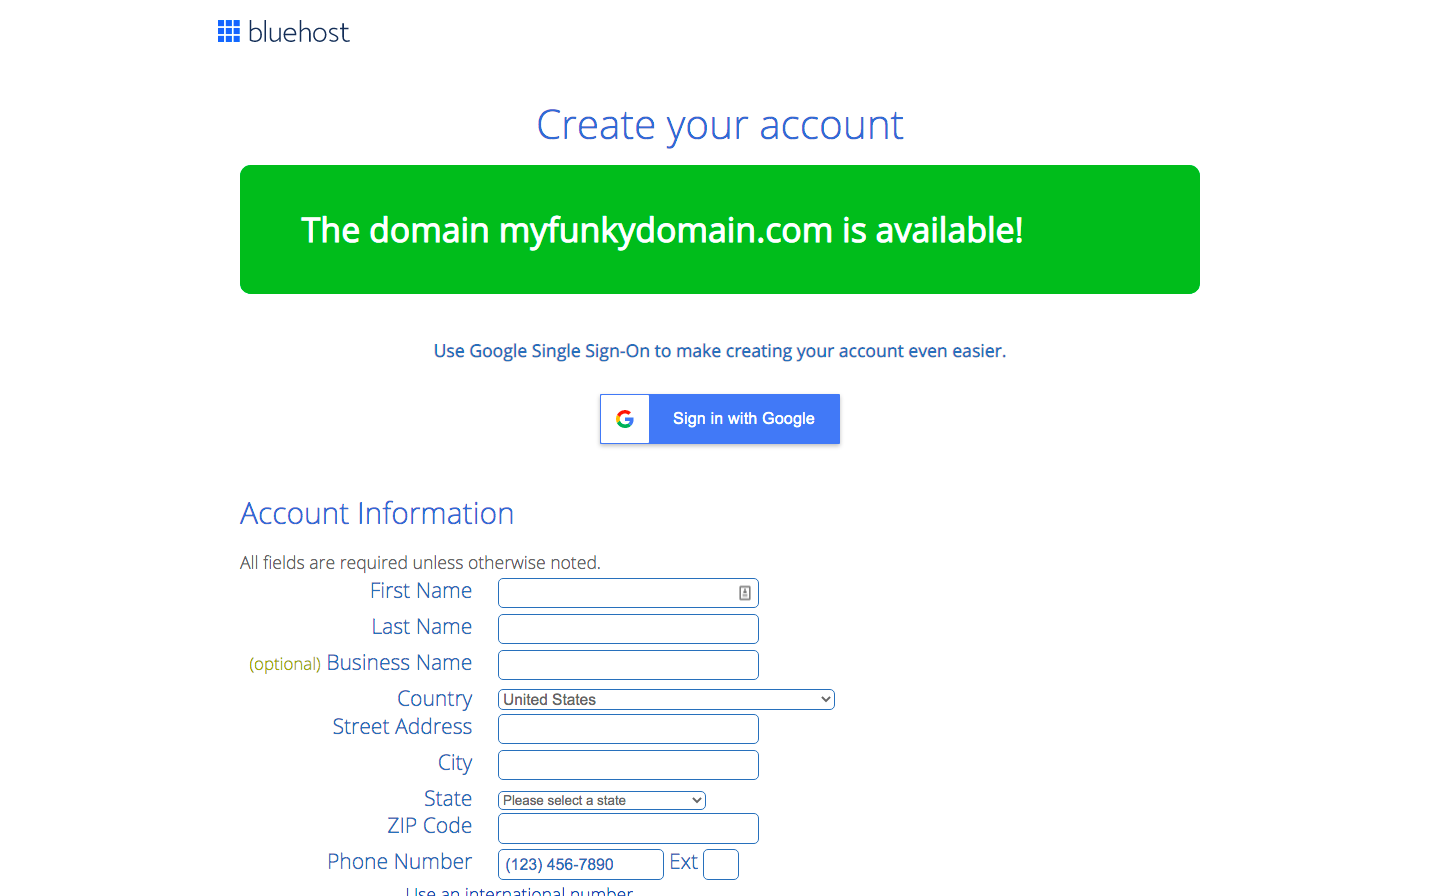 Create Bluehost account